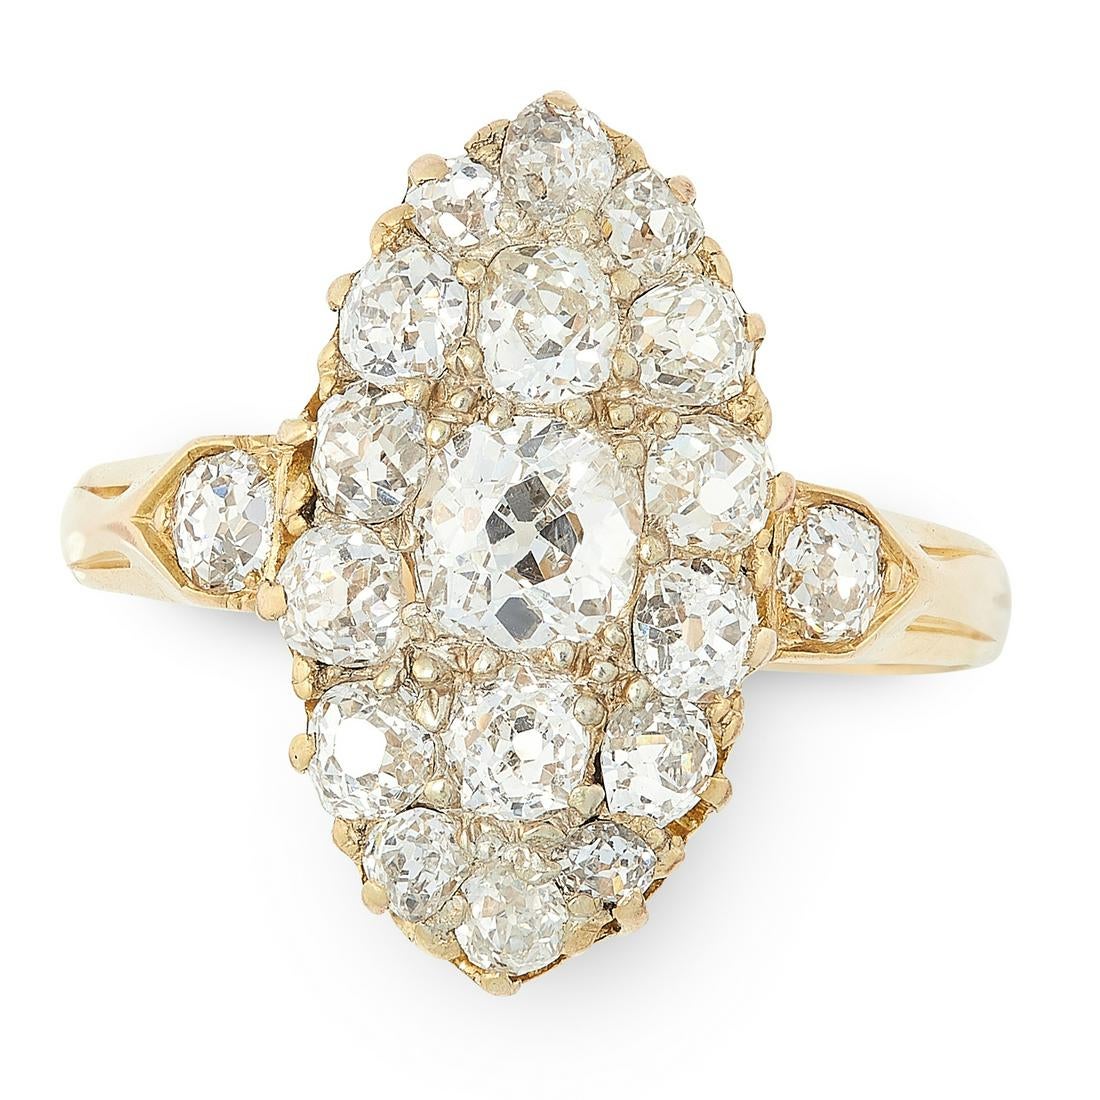 AN ANTIQUE DIAMOND DRESS RING in high carat yellow gold, the nanette face set with a cluster of